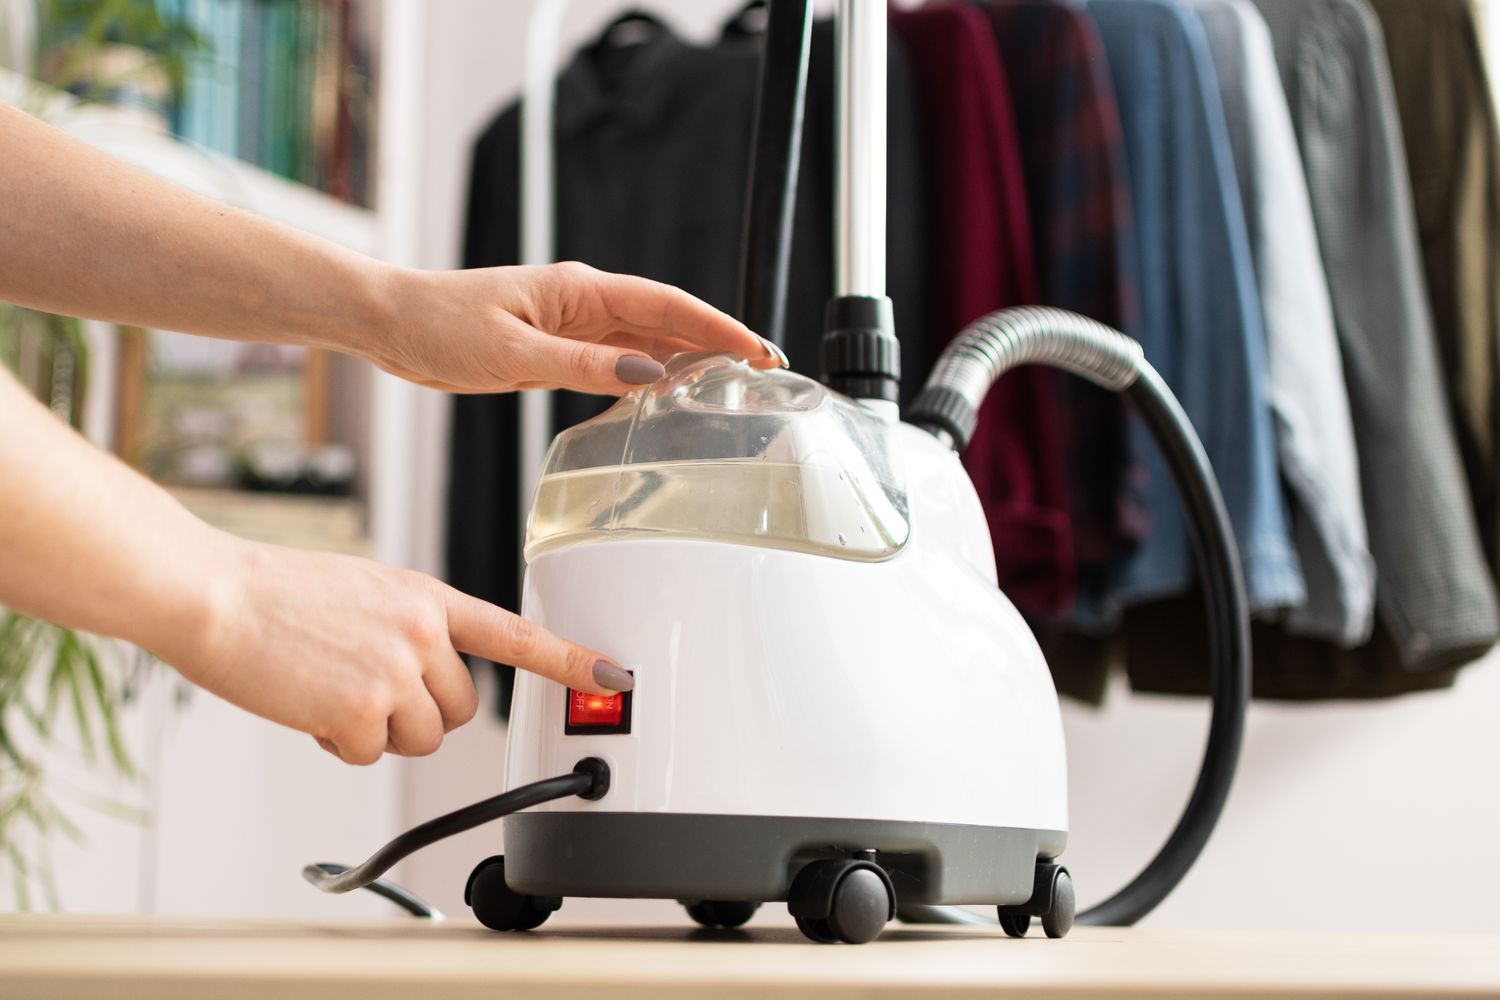 How To Use A Steamer For Clothes | Storables